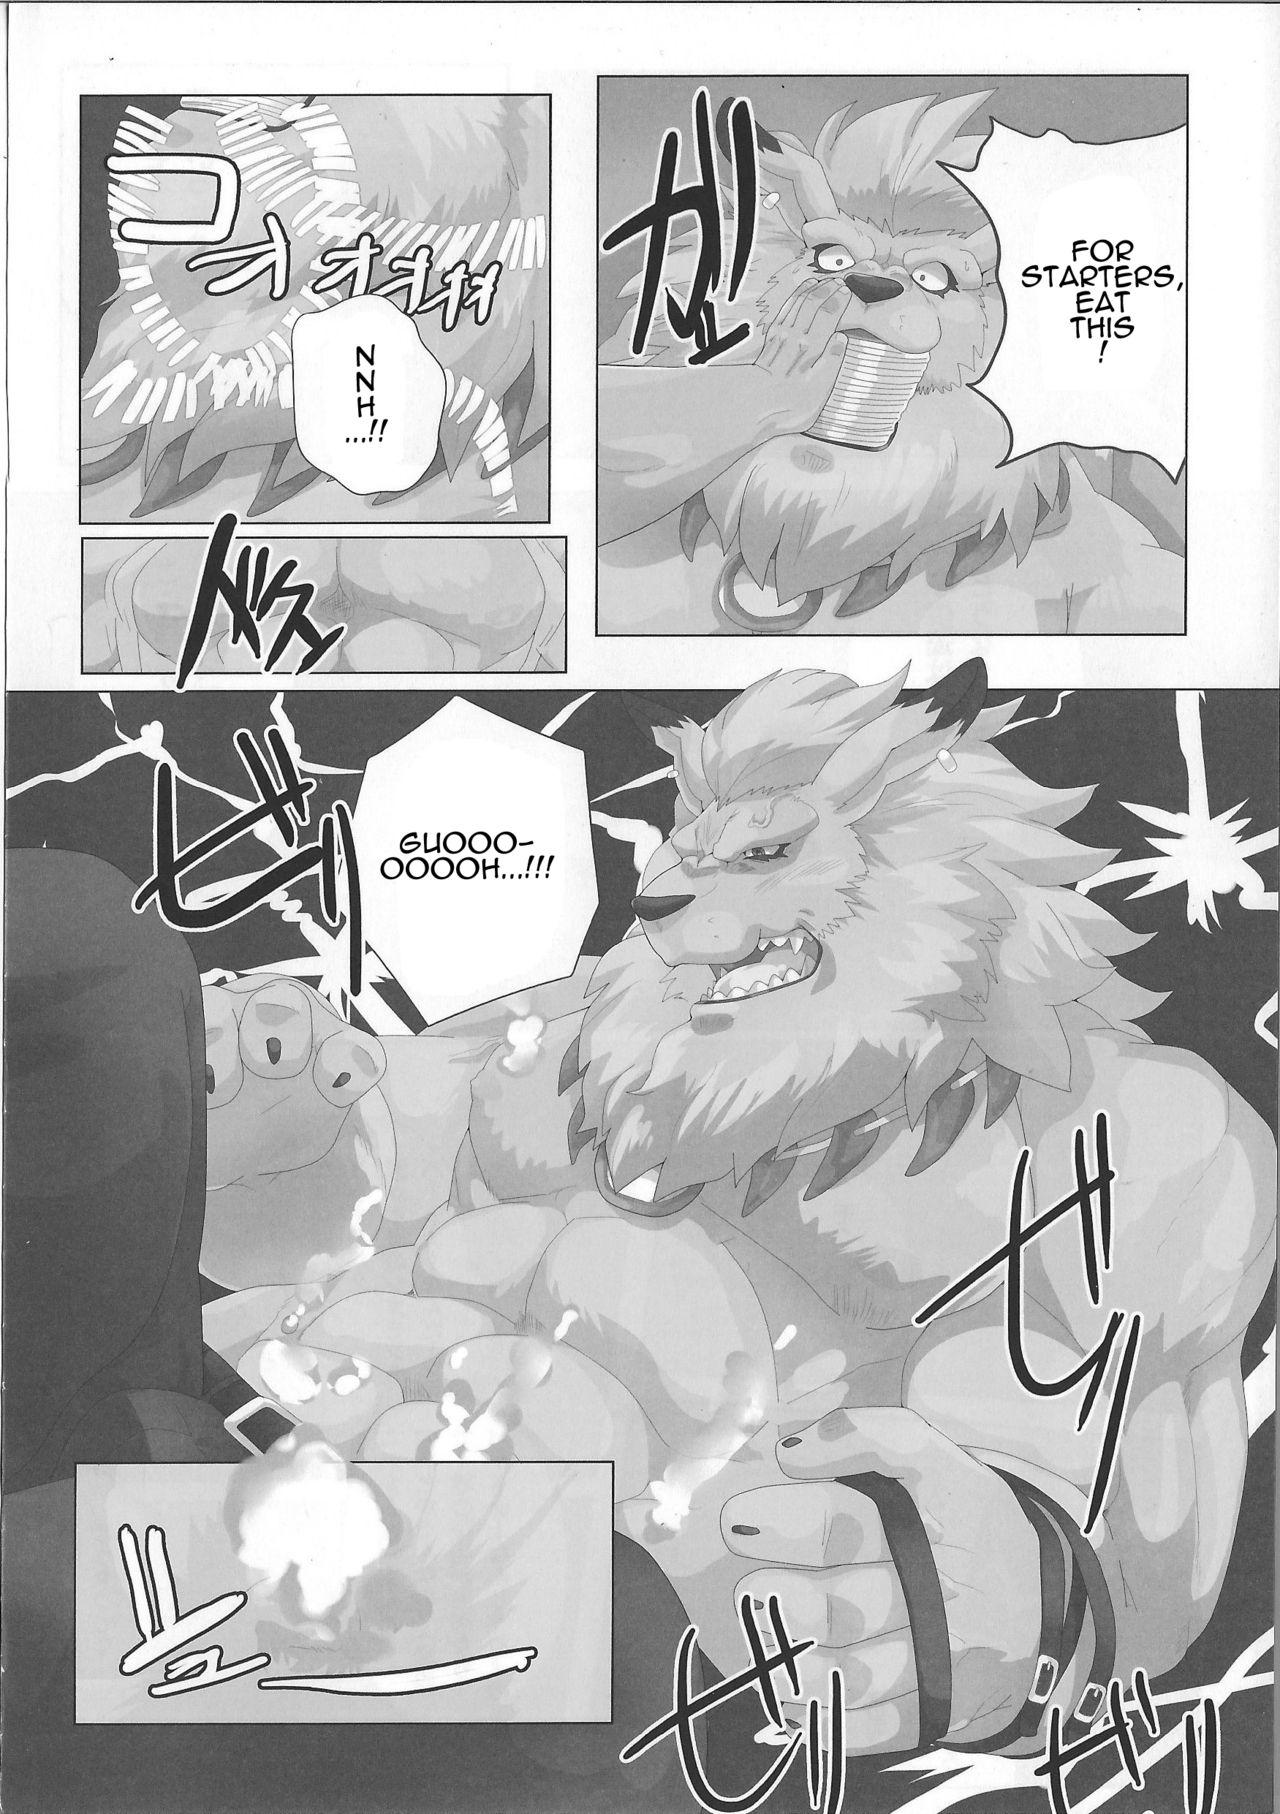 Family Taboo [Debirobu] For the Lion-Man Type Electric Life Form to Overturn Fate - Leomon Doujin [ENG] - Digimon Gay Facial - Page 8